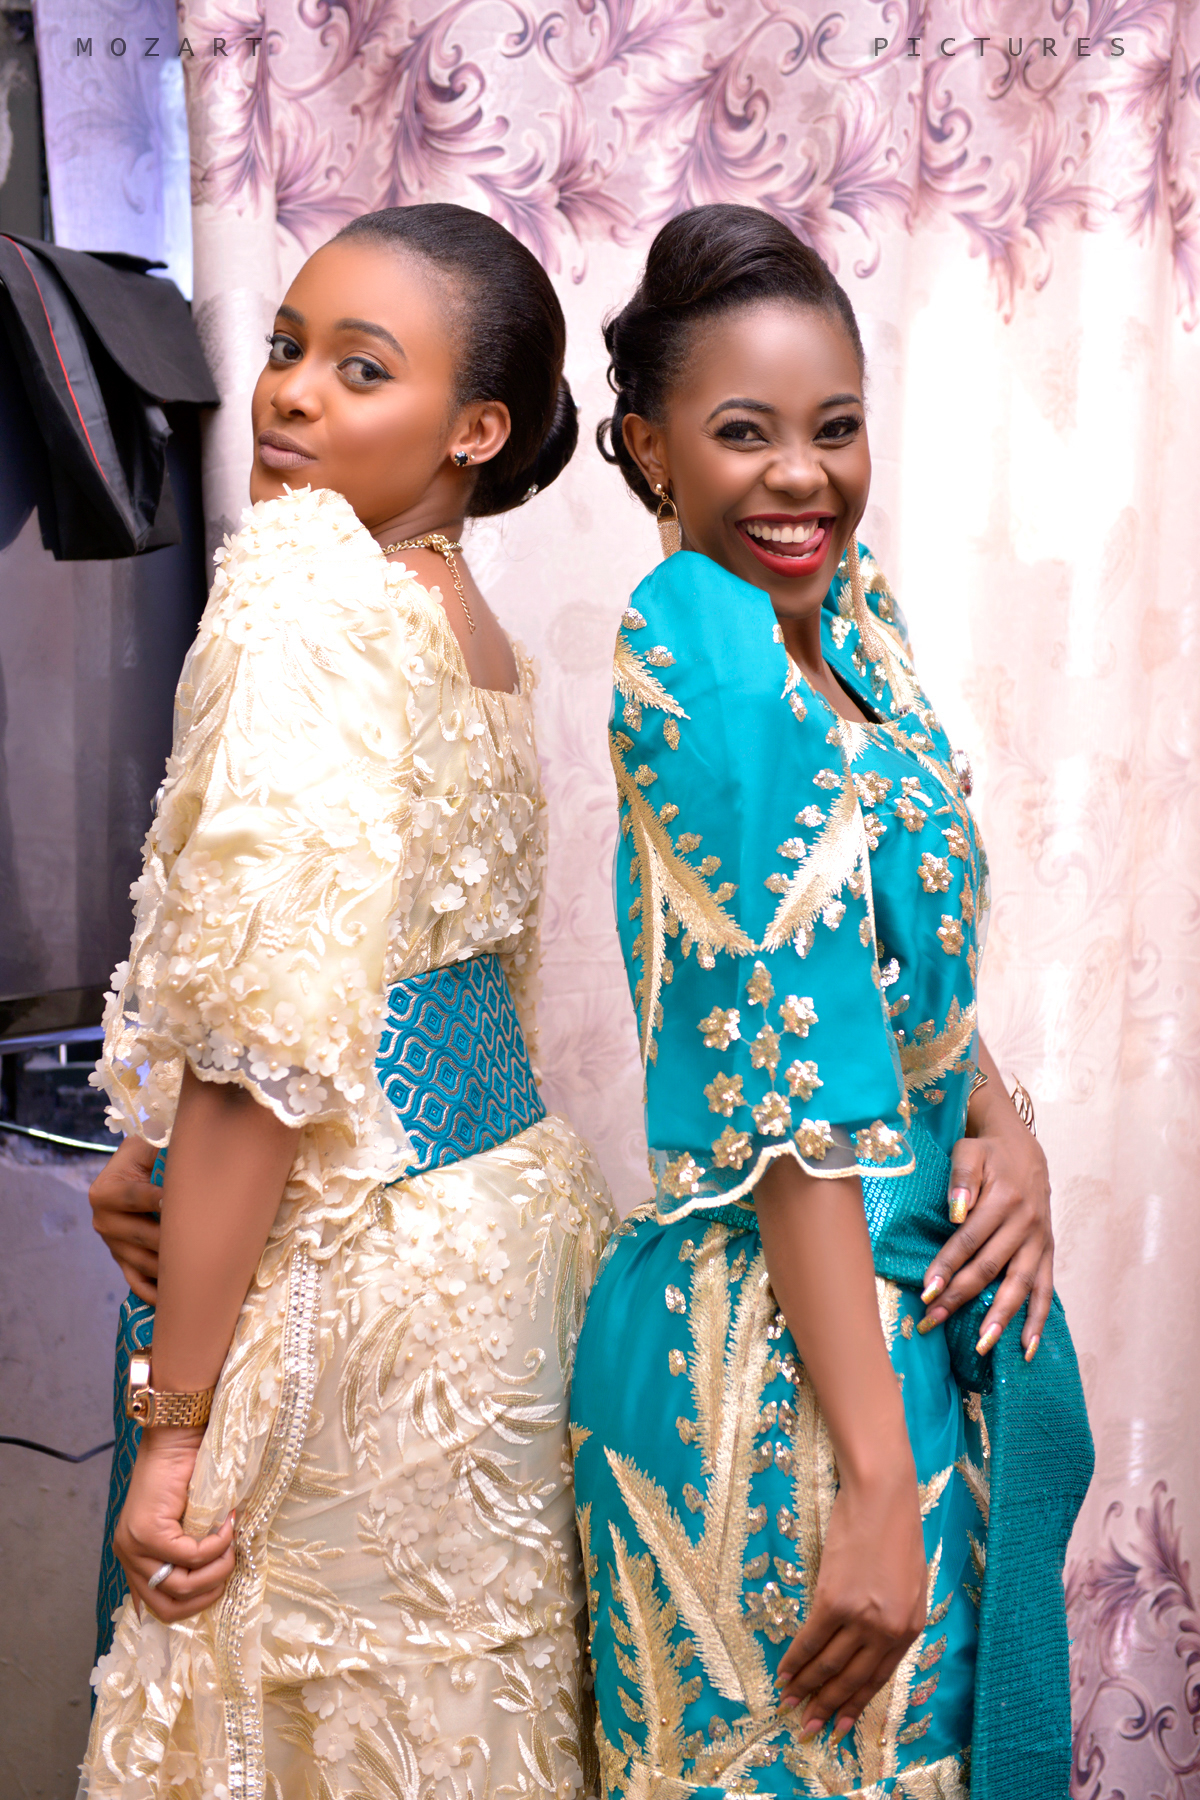 Mimi and Doreen Komuhangi as her maid of honor, shots powered by Mozart Pictures